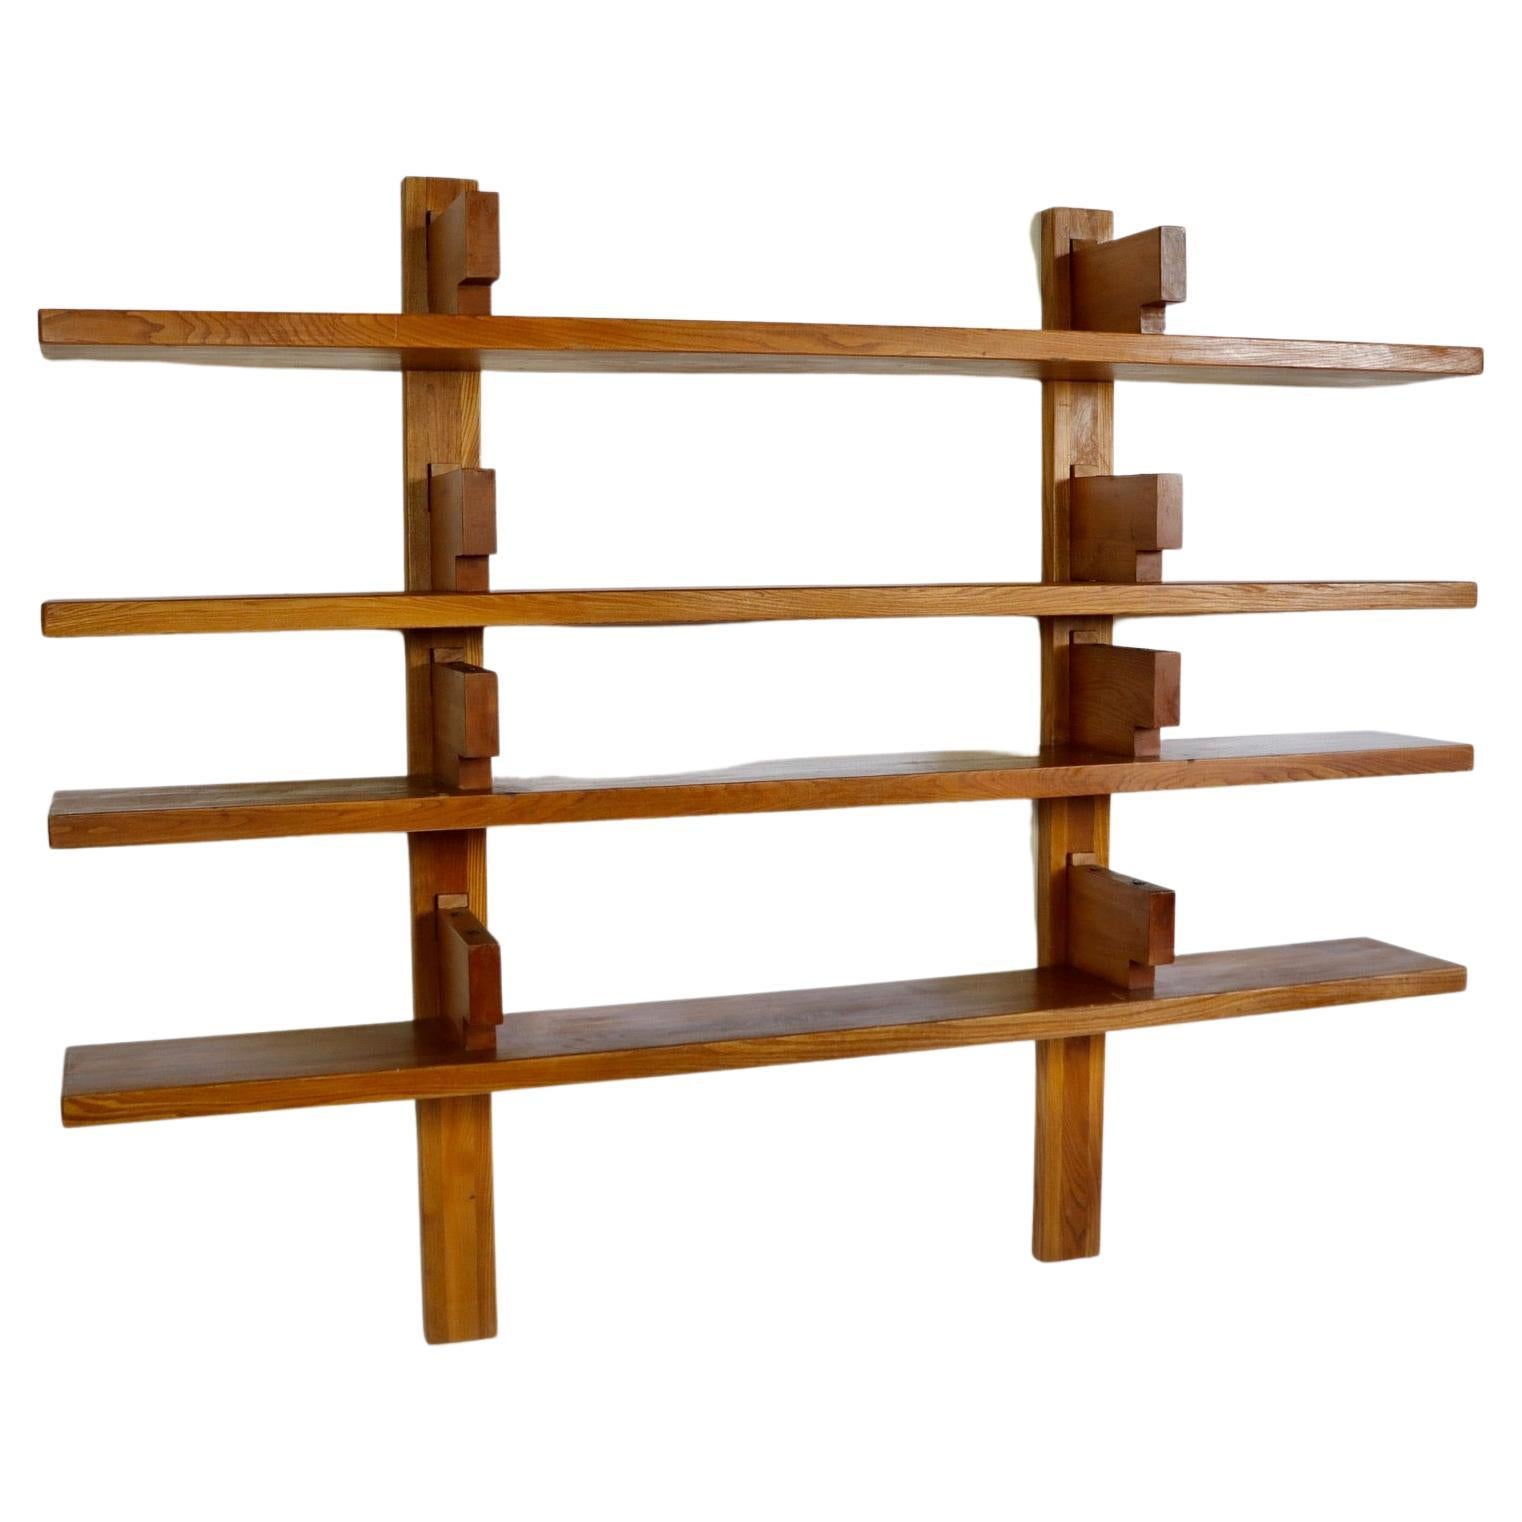 Incredible bookshelf, 'The Bibliothèque' model no. B17B in solid Elm-wood by the great French designer Pierre Chapo.
The breathtaking design by Chapo consists of four solid elm shelves that rest under brackets. Interestingly you would expect the